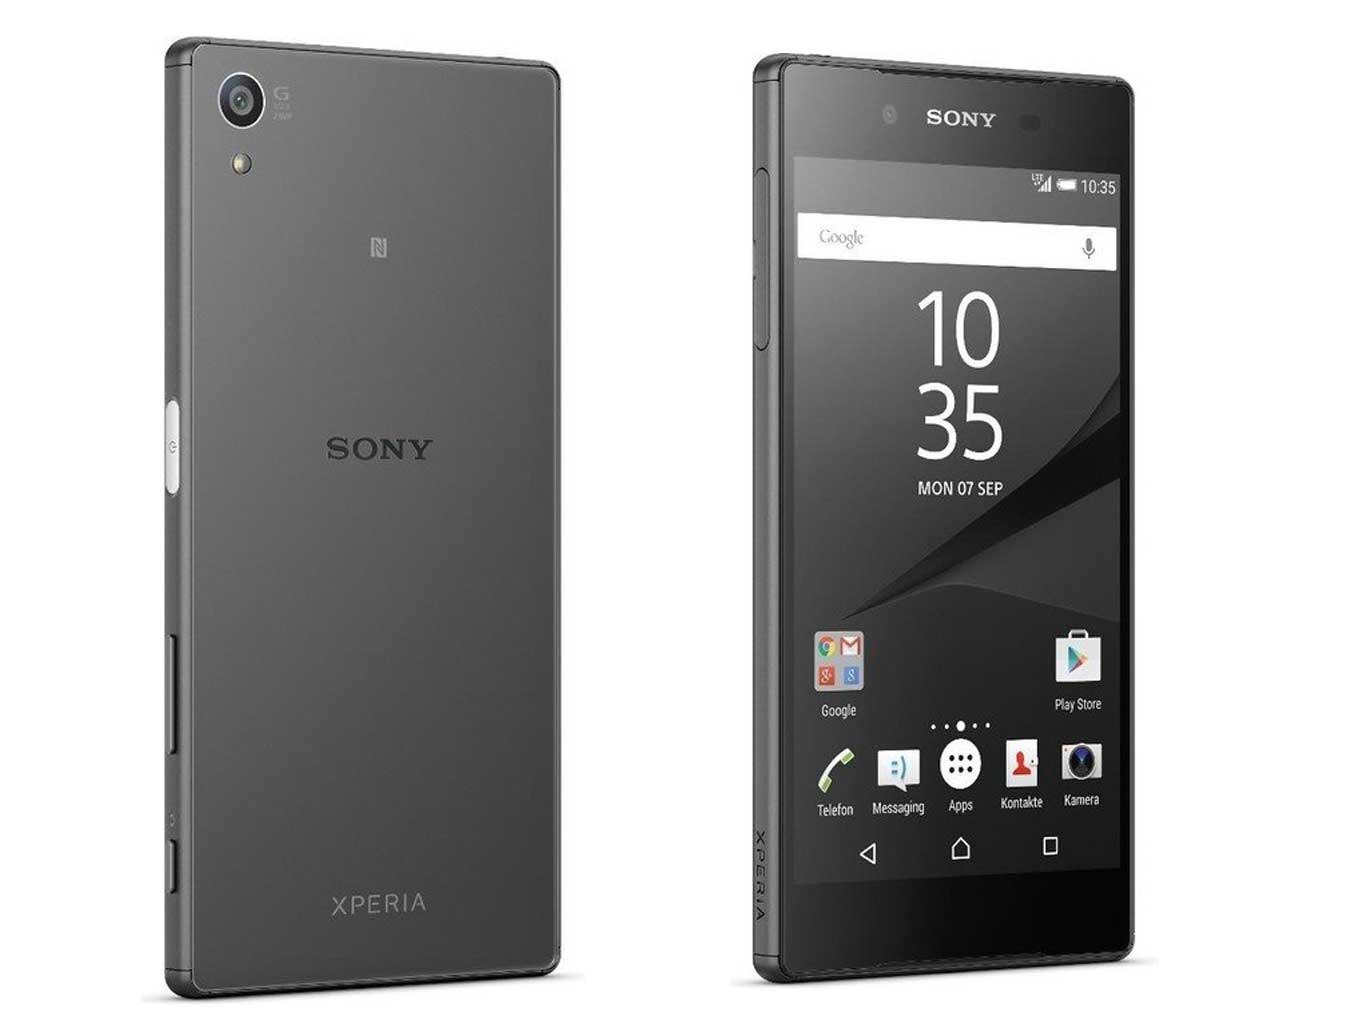 hst_sonyxperiaz5compact_8